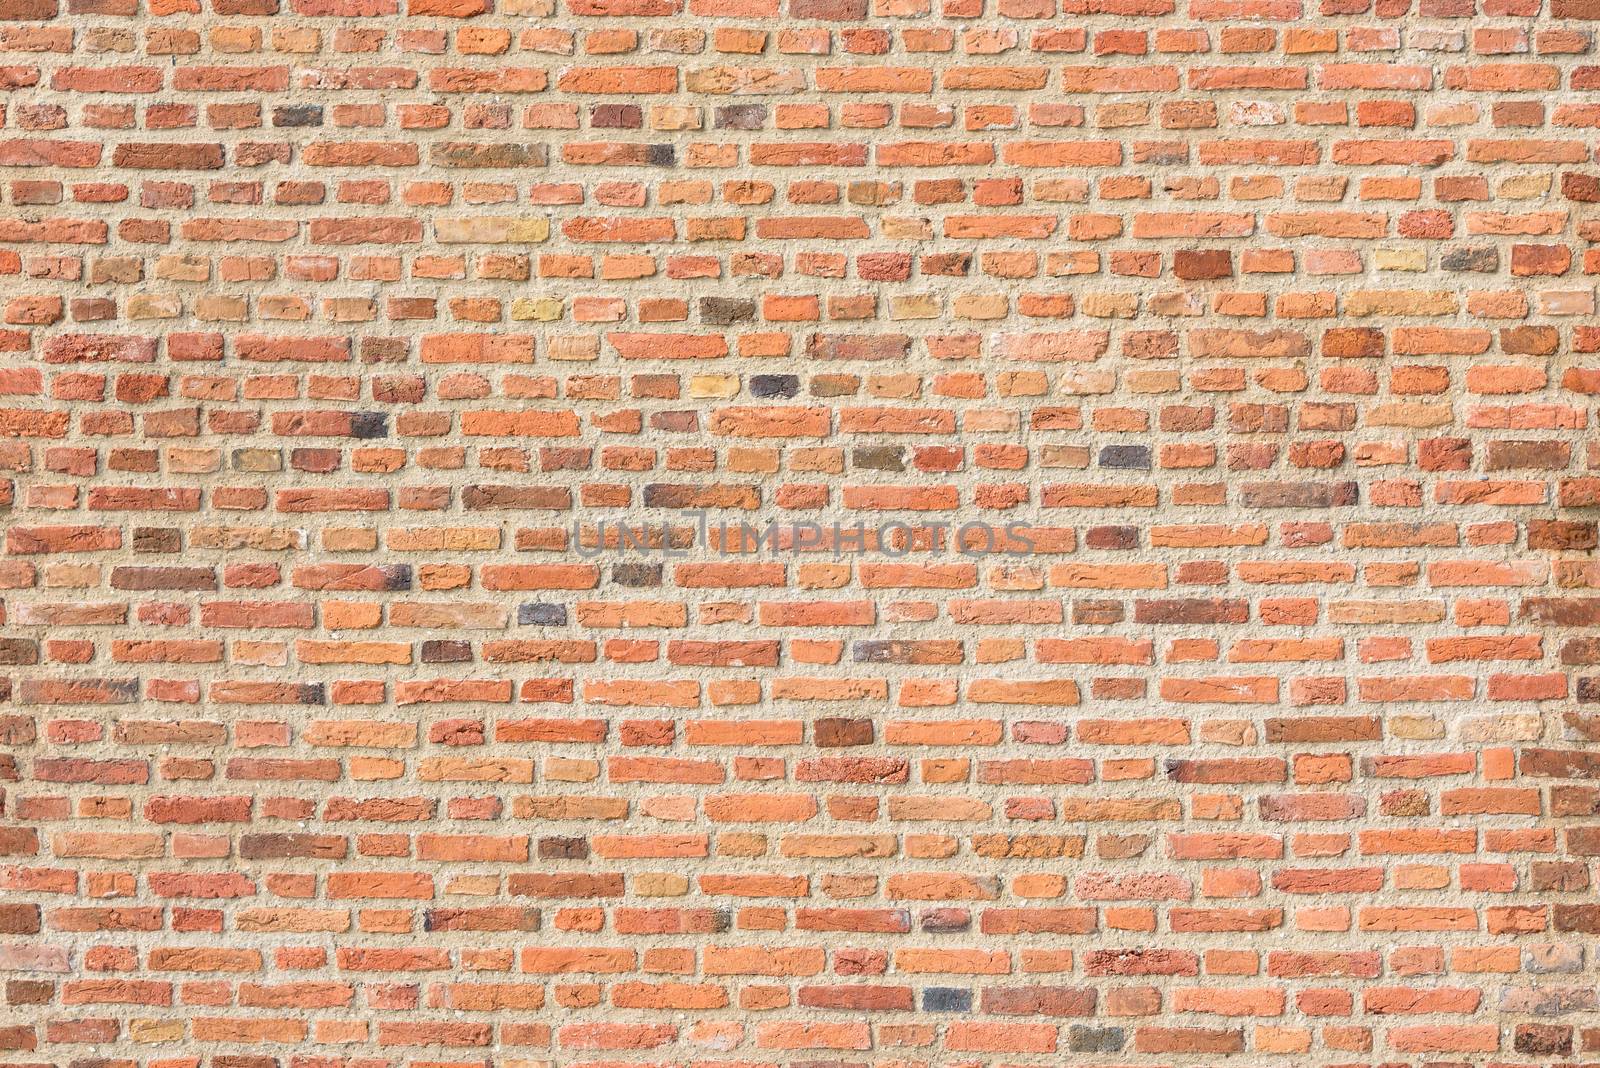 Old red brick wall as seamless texture or background